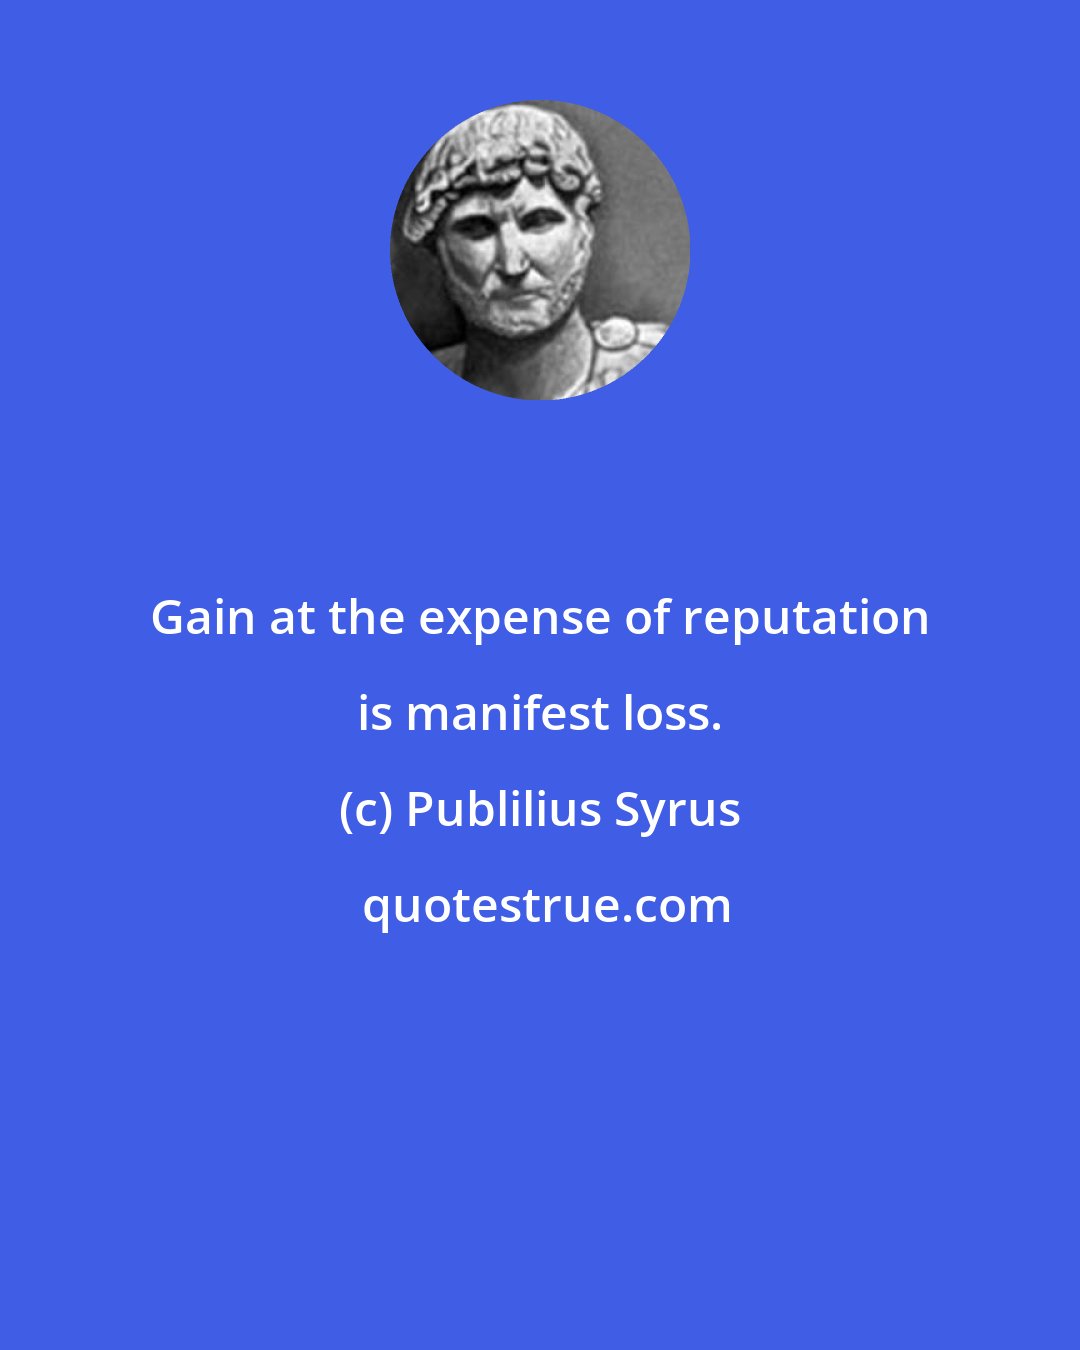 Publilius Syrus: Gain at the expense of reputation is manifest loss.